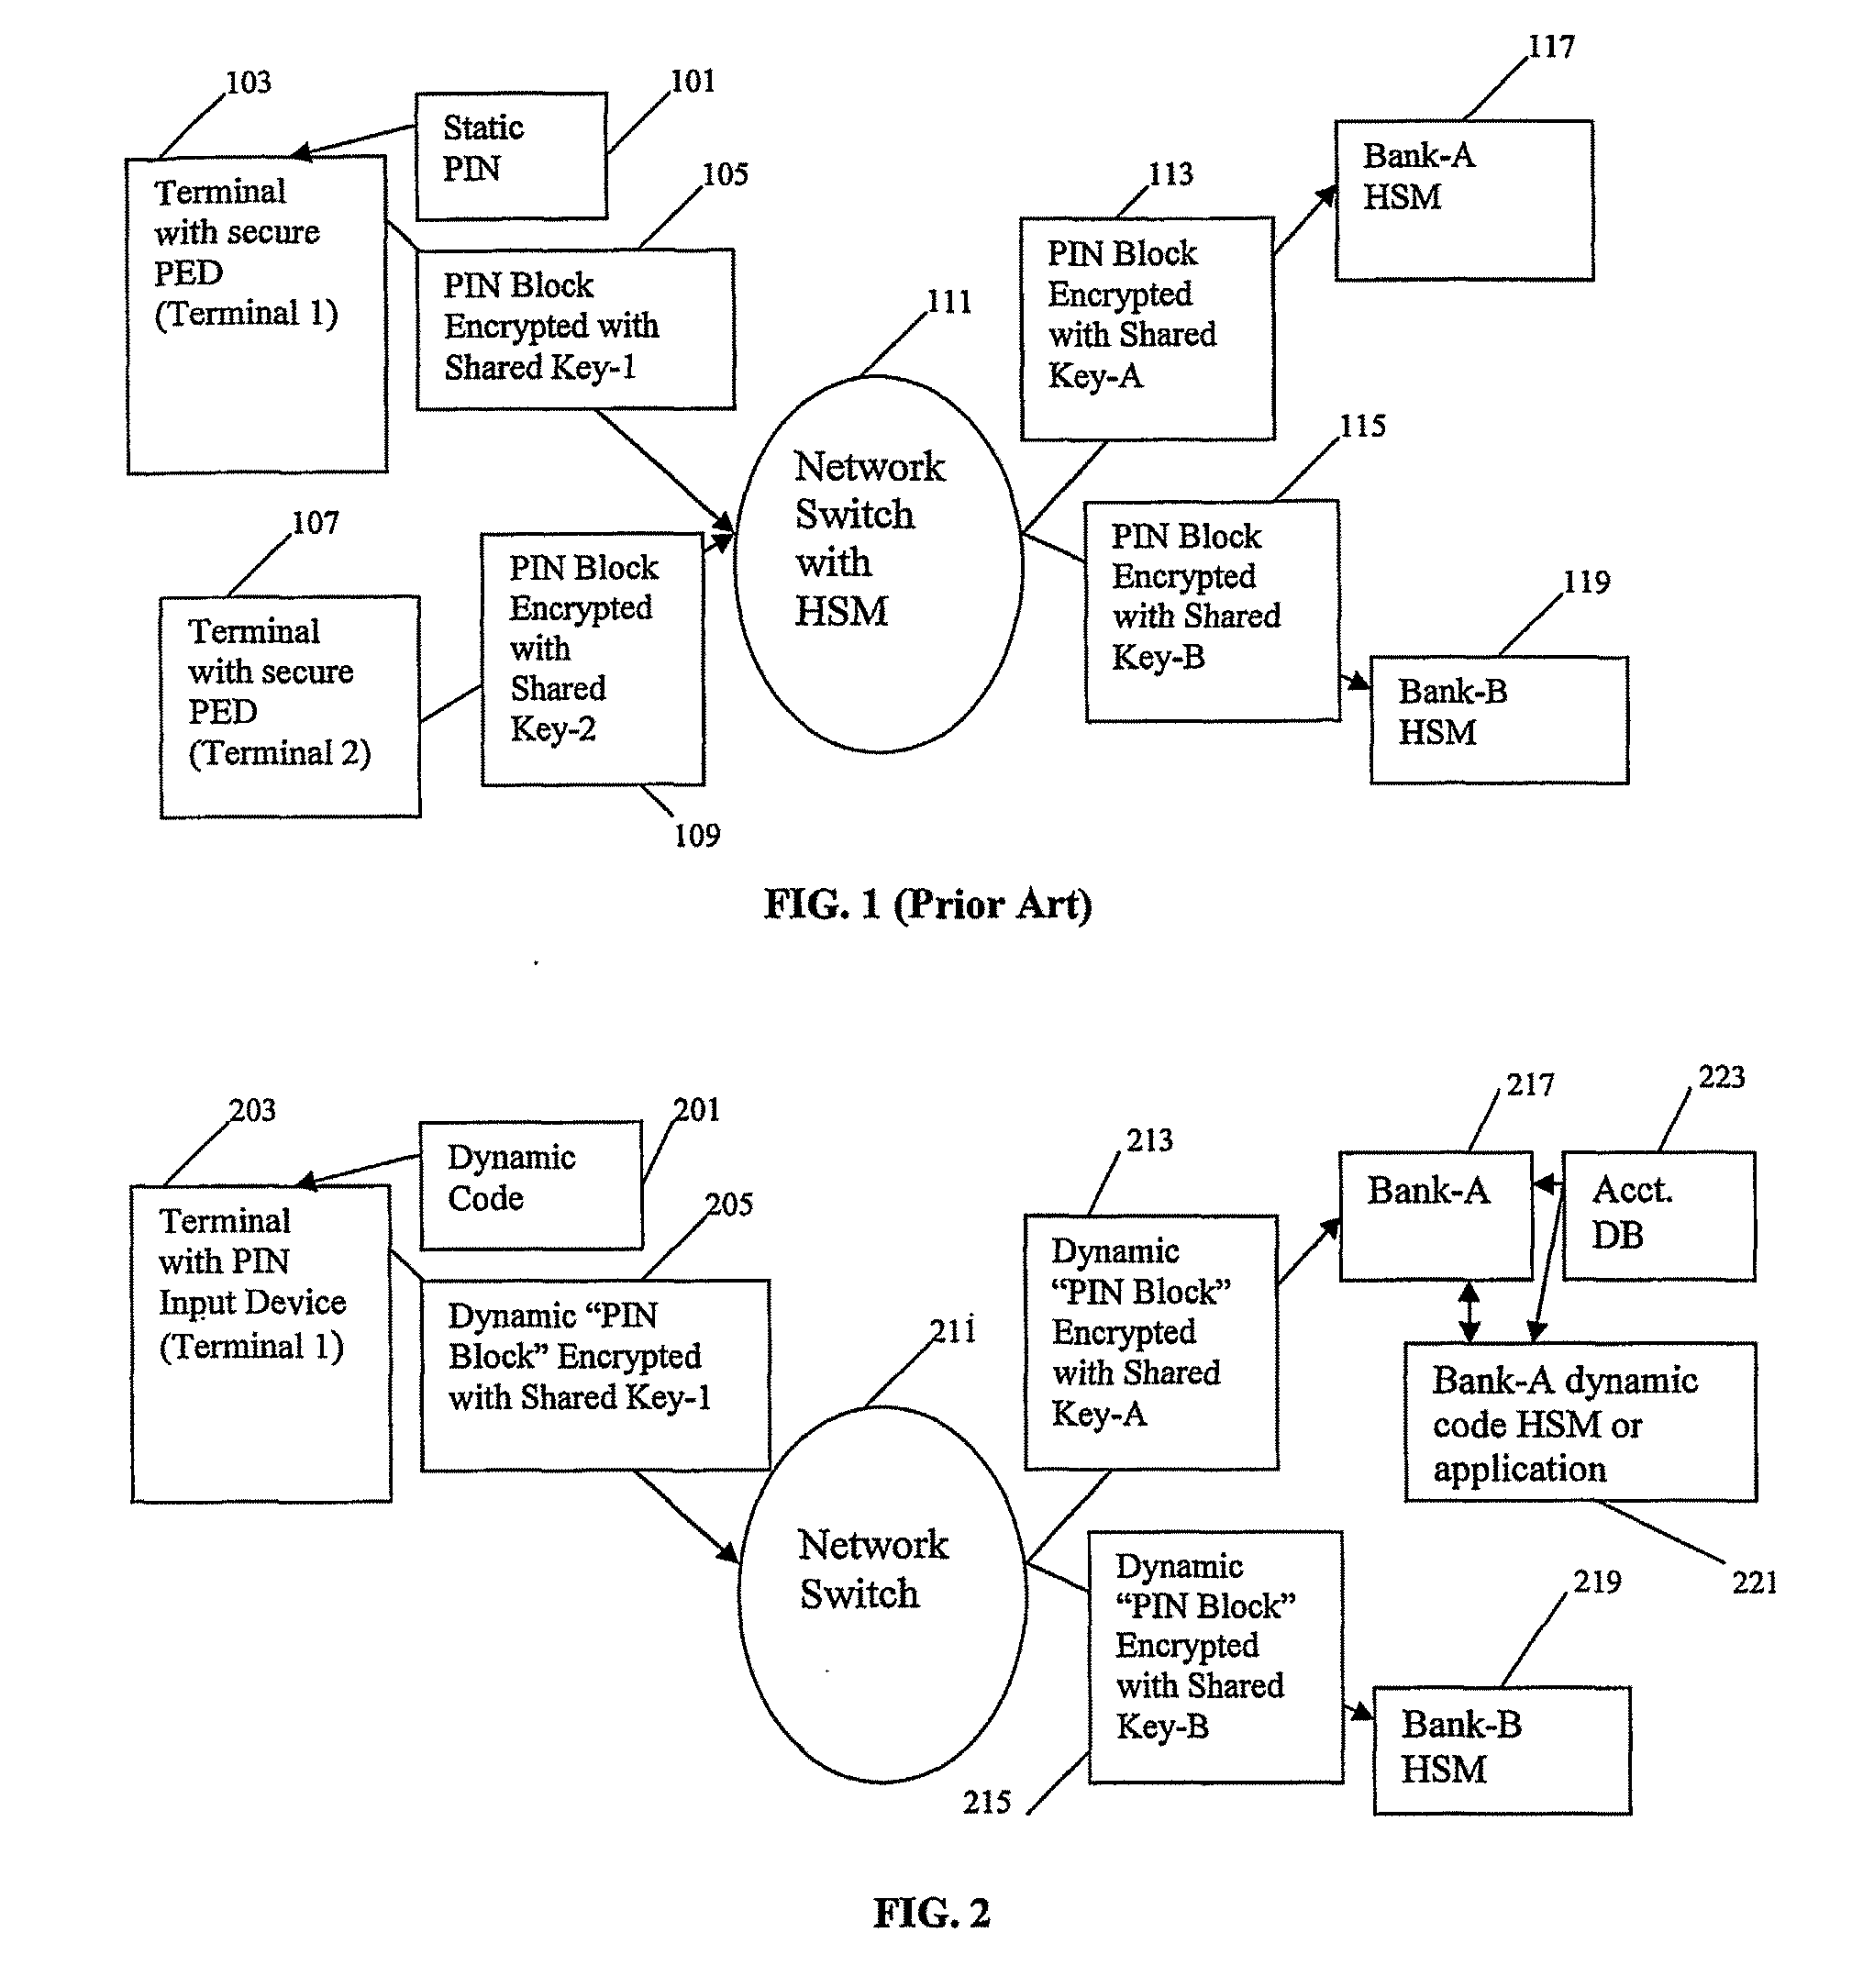 Method and system for performing a transaction using a dynamic authorization code